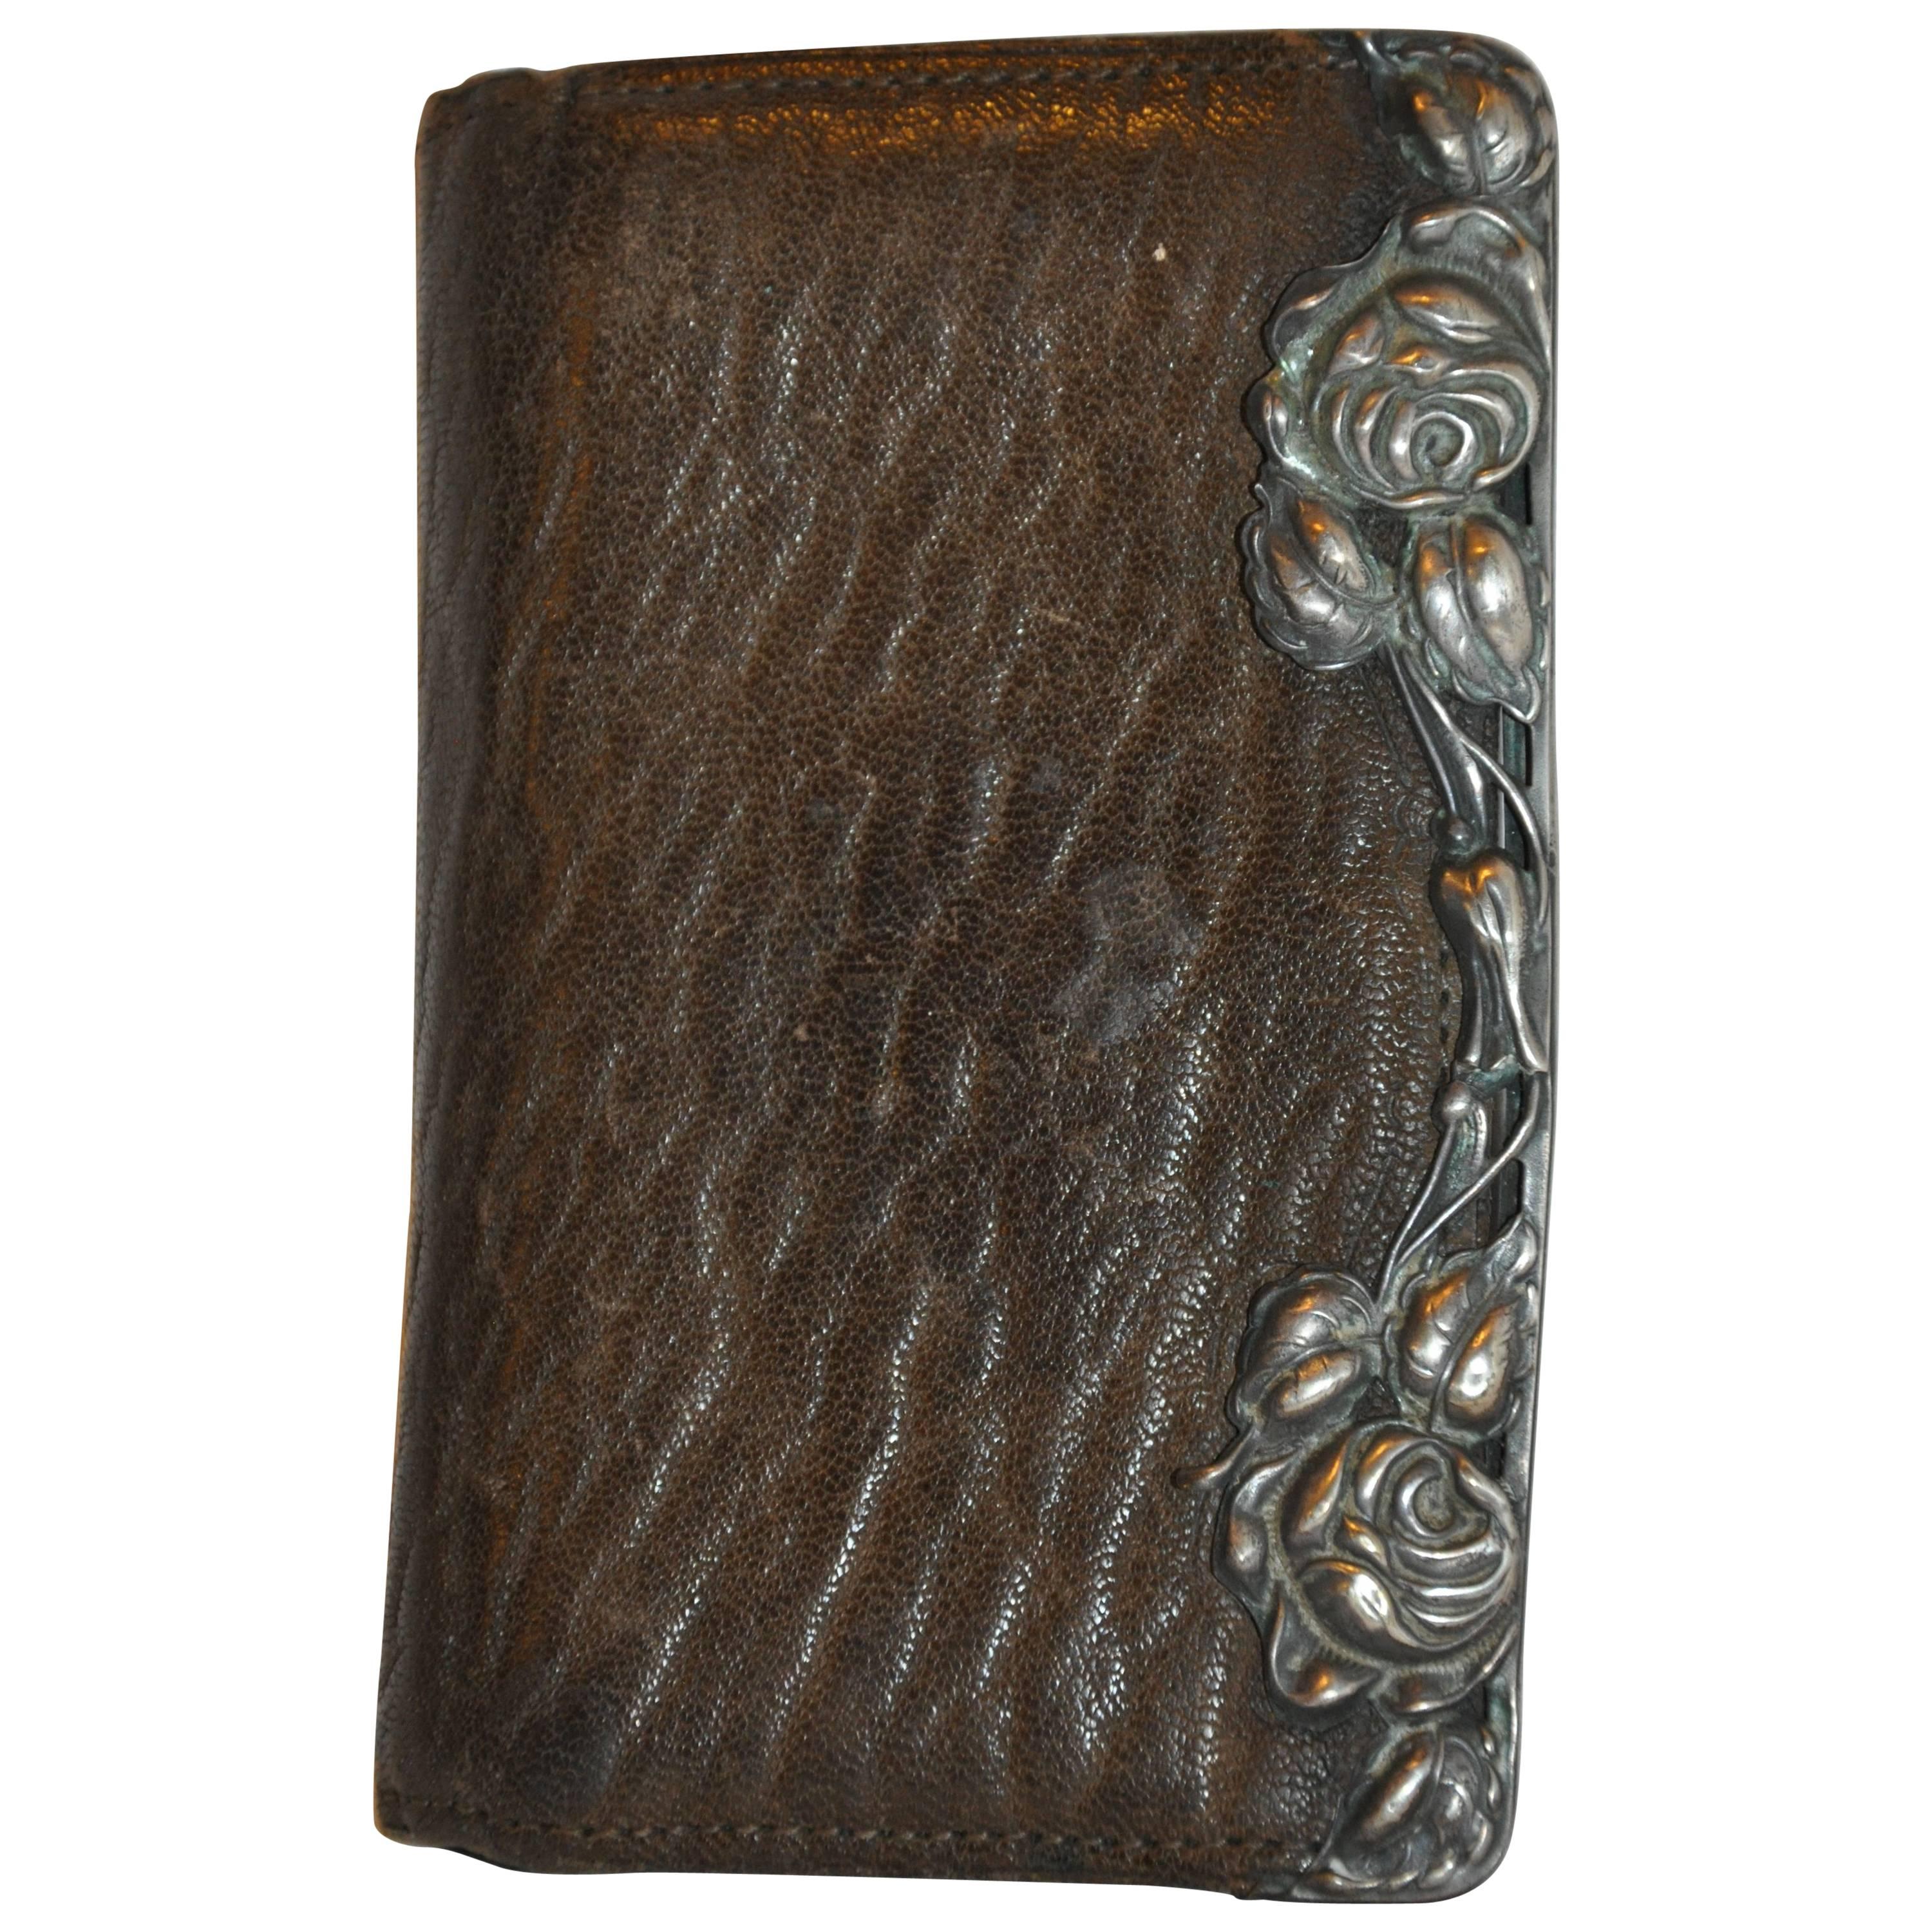 BuffaloSkin Wallet Detailed with Swirls Of Floral Sterling Silver Accent For Sale